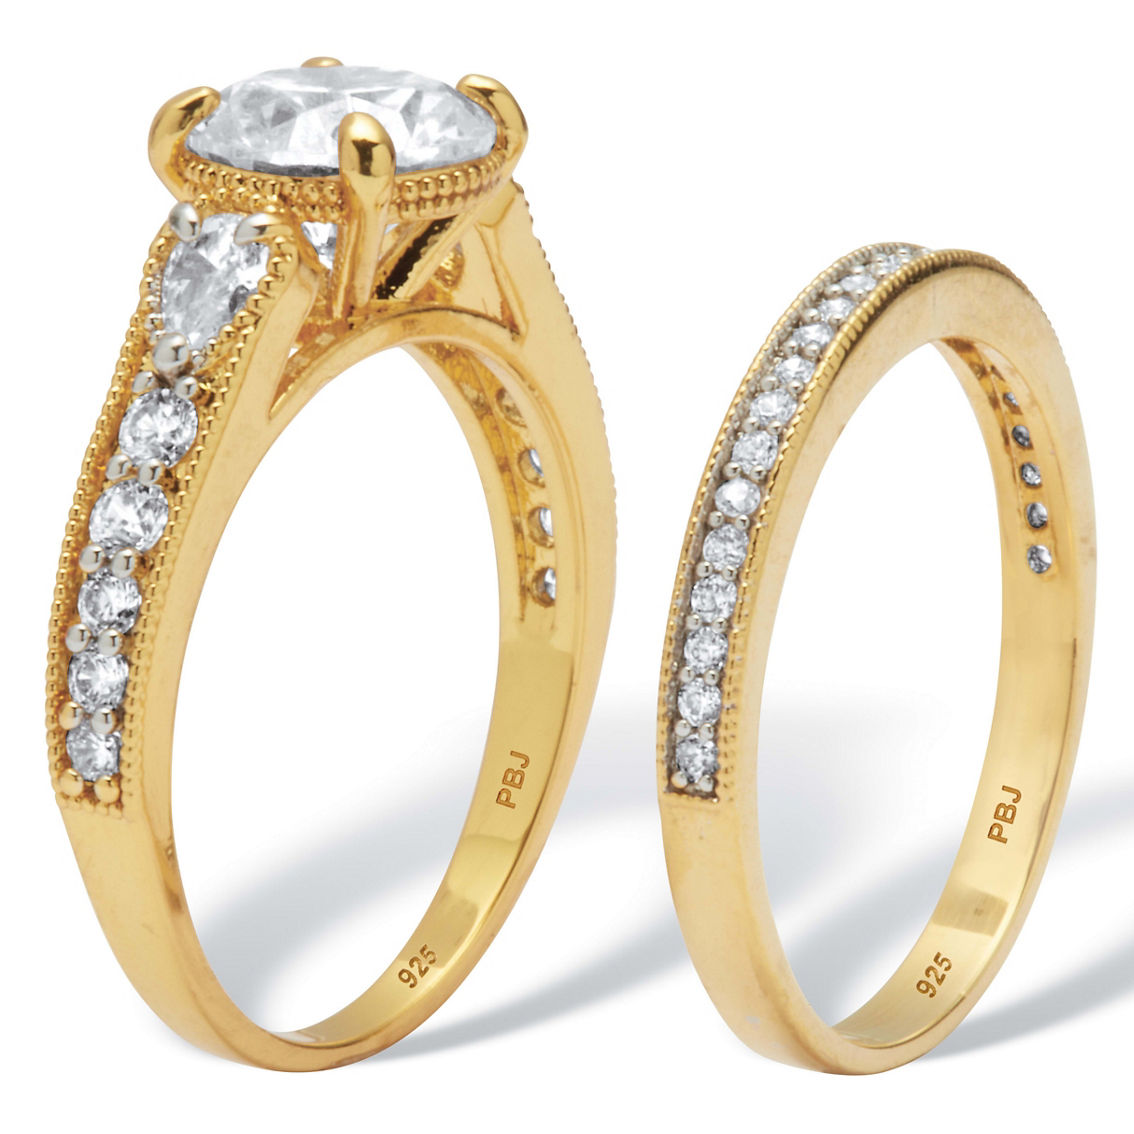 PalmBeach 2.82 TCW Round CZ 14k Gold-Plated Sterling Silver Bridal Ring Set - Image 2 of 5